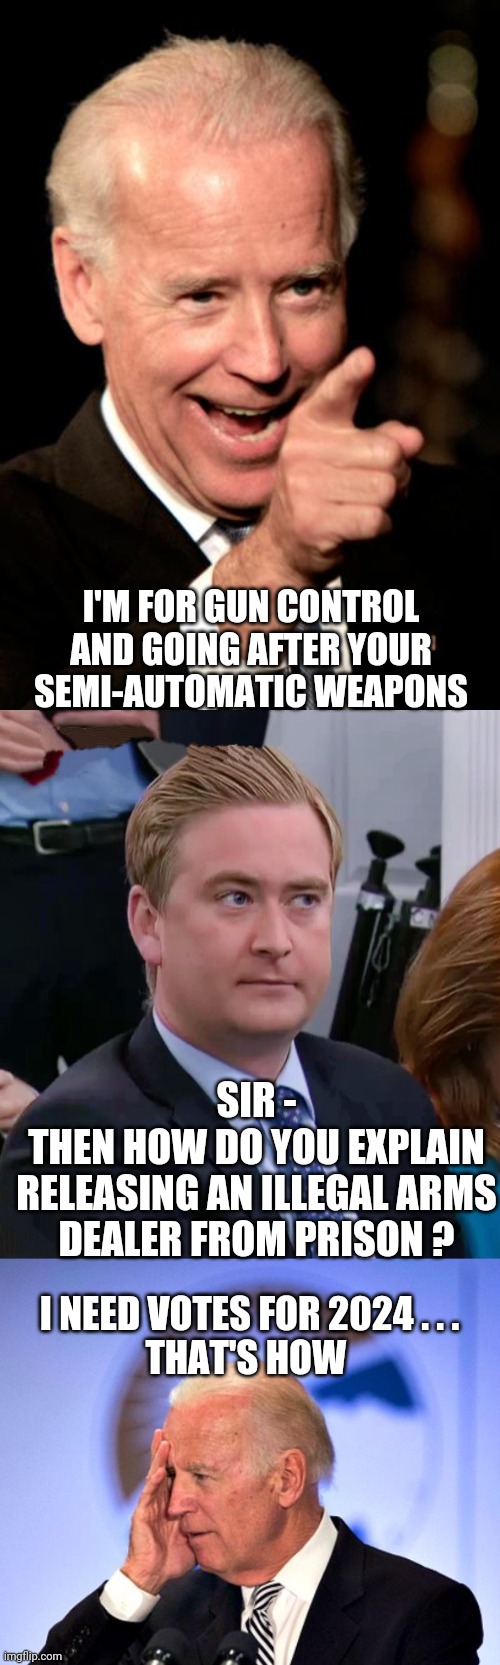 Gun Deal of the Century | I'M FOR GUN CONTROL AND GOING AFTER YOUR SEMI-AUTOMATIC WEAPONS; SIR -
THEN HOW DO YOU EXPLAIN RELEASING AN ILLEGAL ARMS DEALER FROM PRISON ? I NEED VOTES FOR 2024 . . .
THAT'S HOW | image tagged in smilin biden,peter doocy vs kjp,liberals,leftists,democrats,griner | made w/ Imgflip meme maker